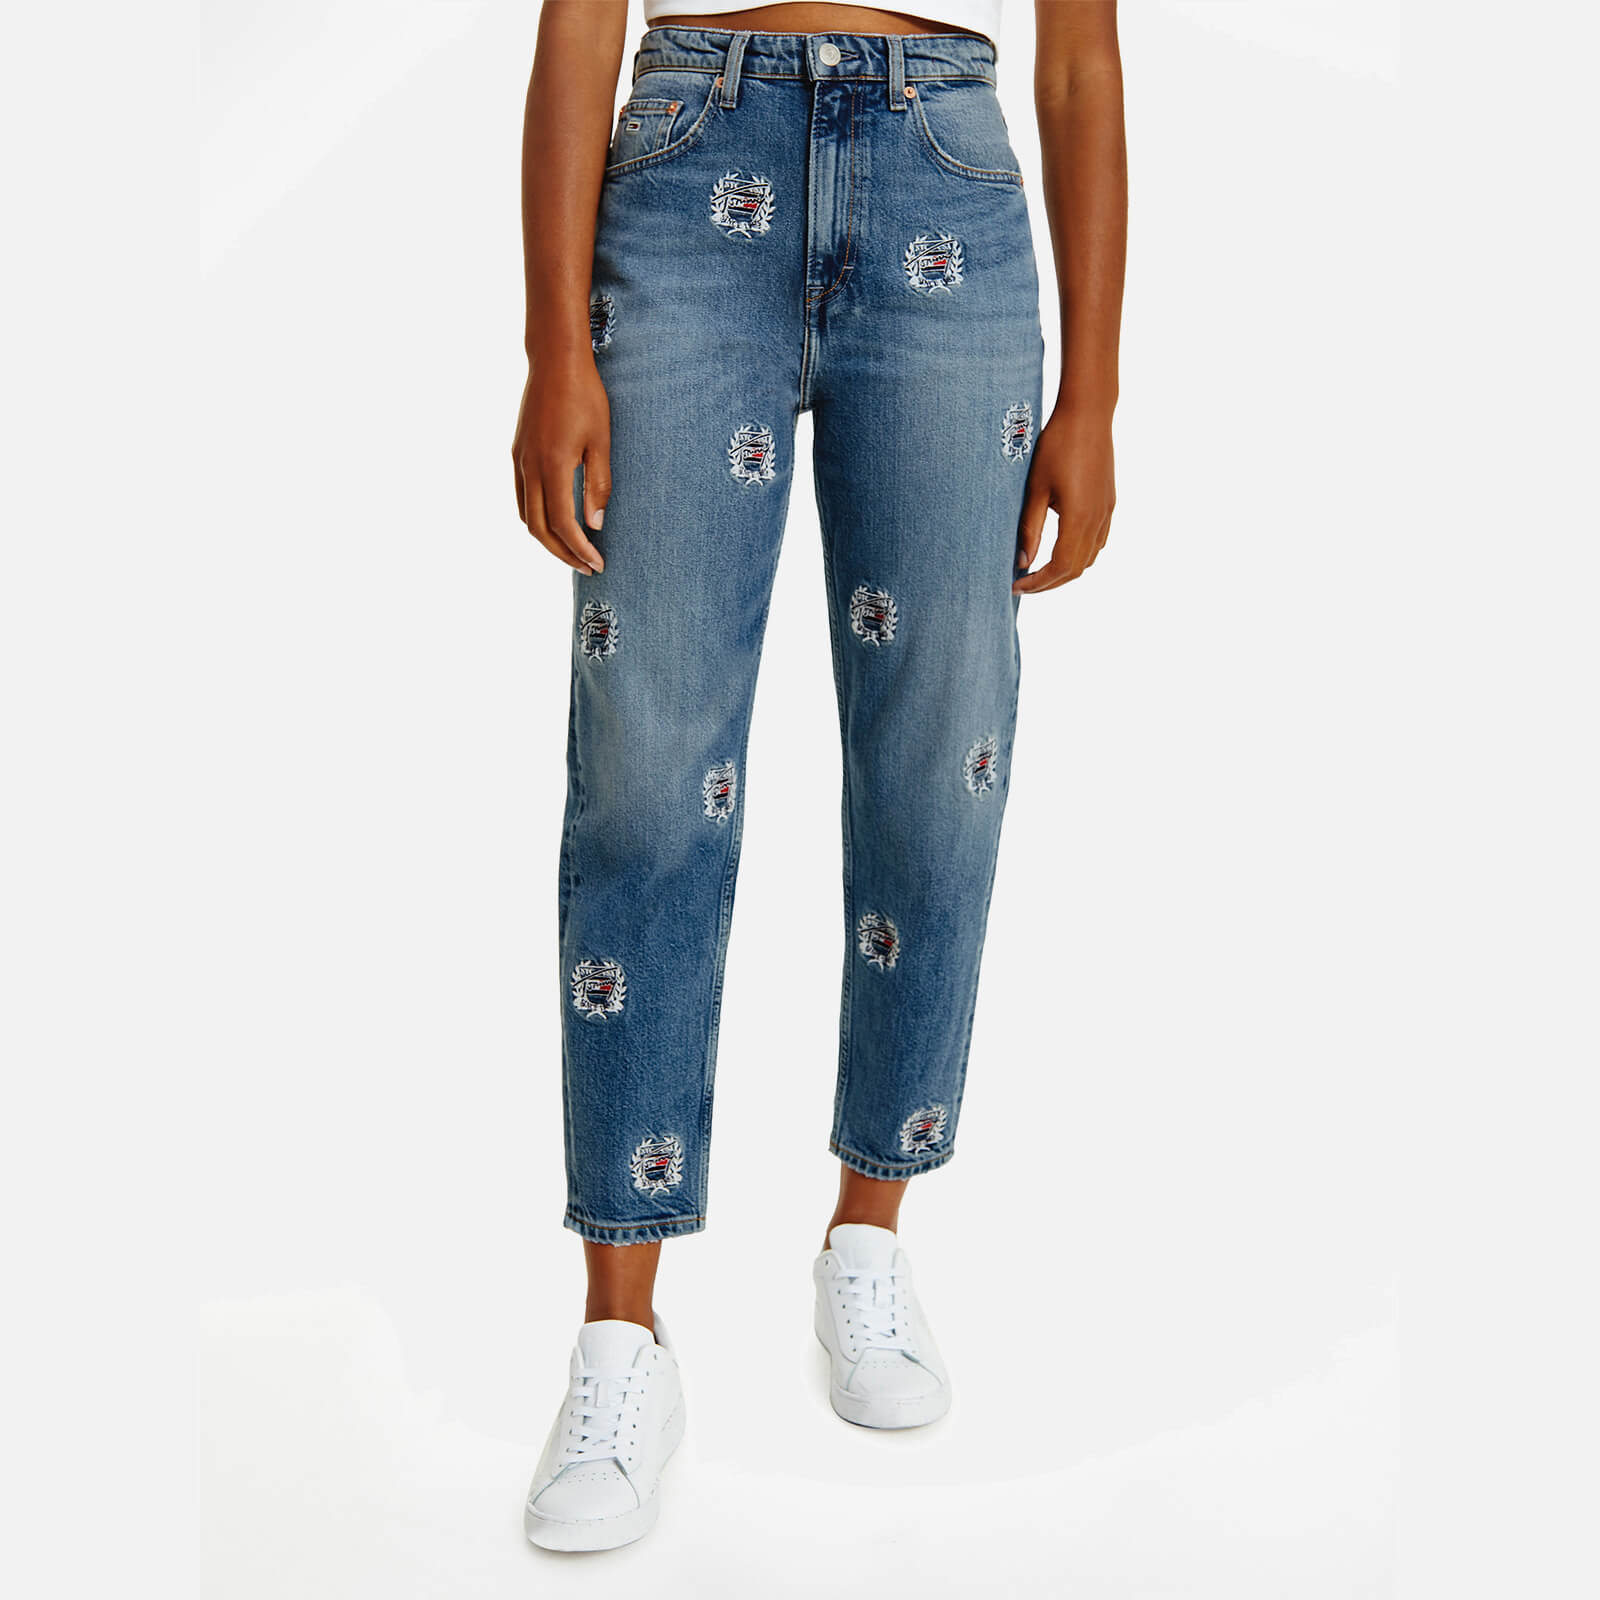 Tommy Jeans Women's Mom Jeans Ultra High Rise Tapered Ce738 - Denim Medium - W25/L30